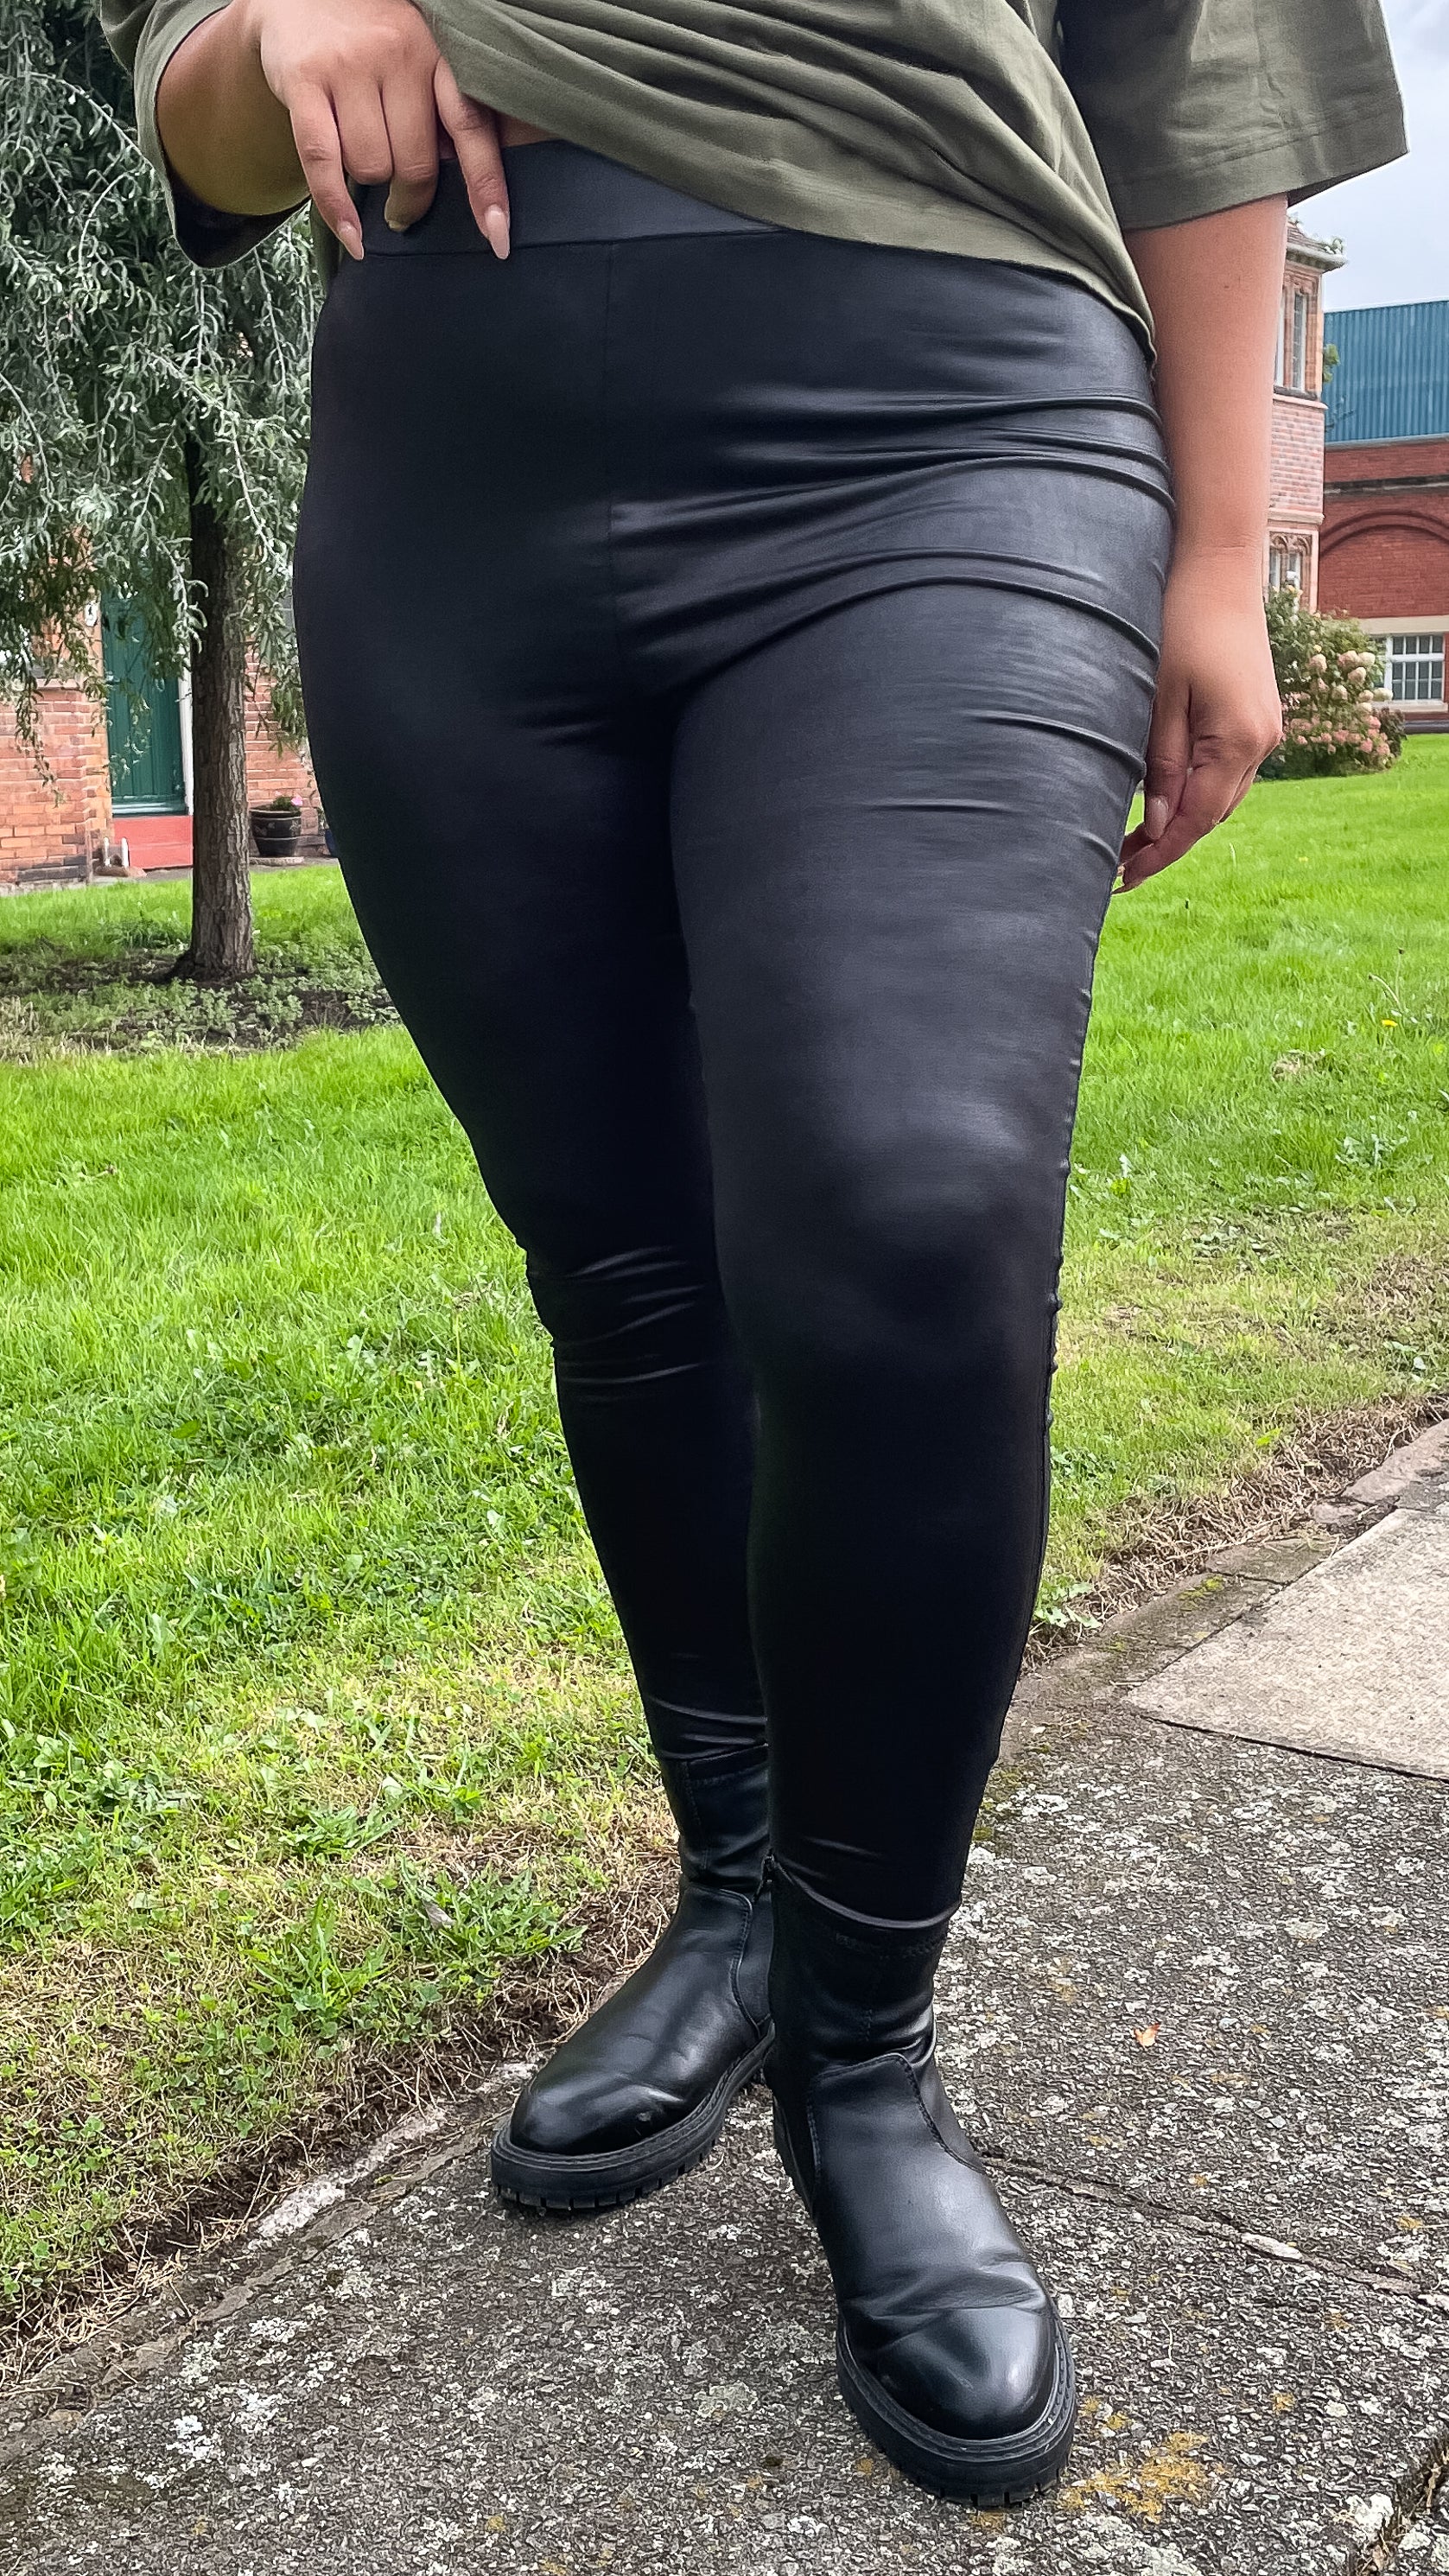 Buy Black Firm Control WOW Leggings from the Next UK online shop